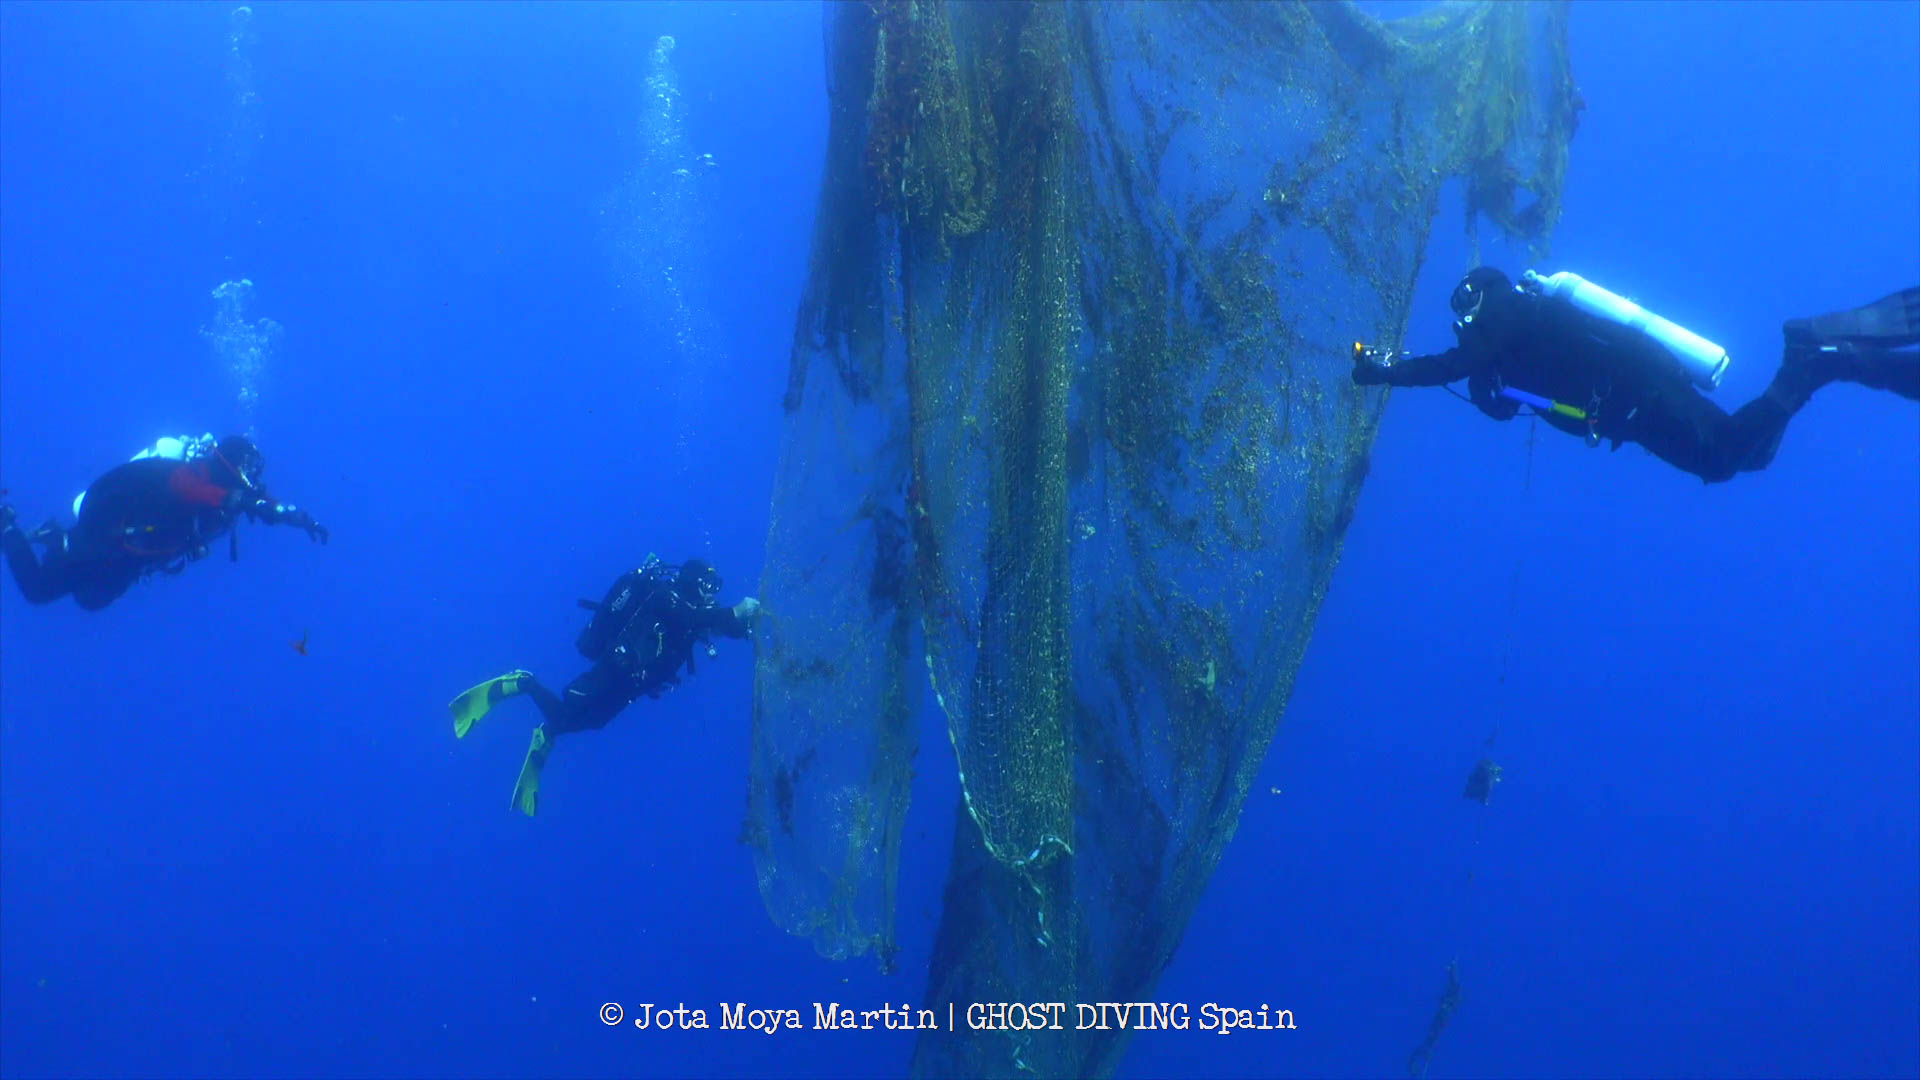 Press Release: Divers lift fishing net weighing 450 kgs from reef in Tossa  de Mar, helping biodiversity thrive again - HEALTHY SEAS